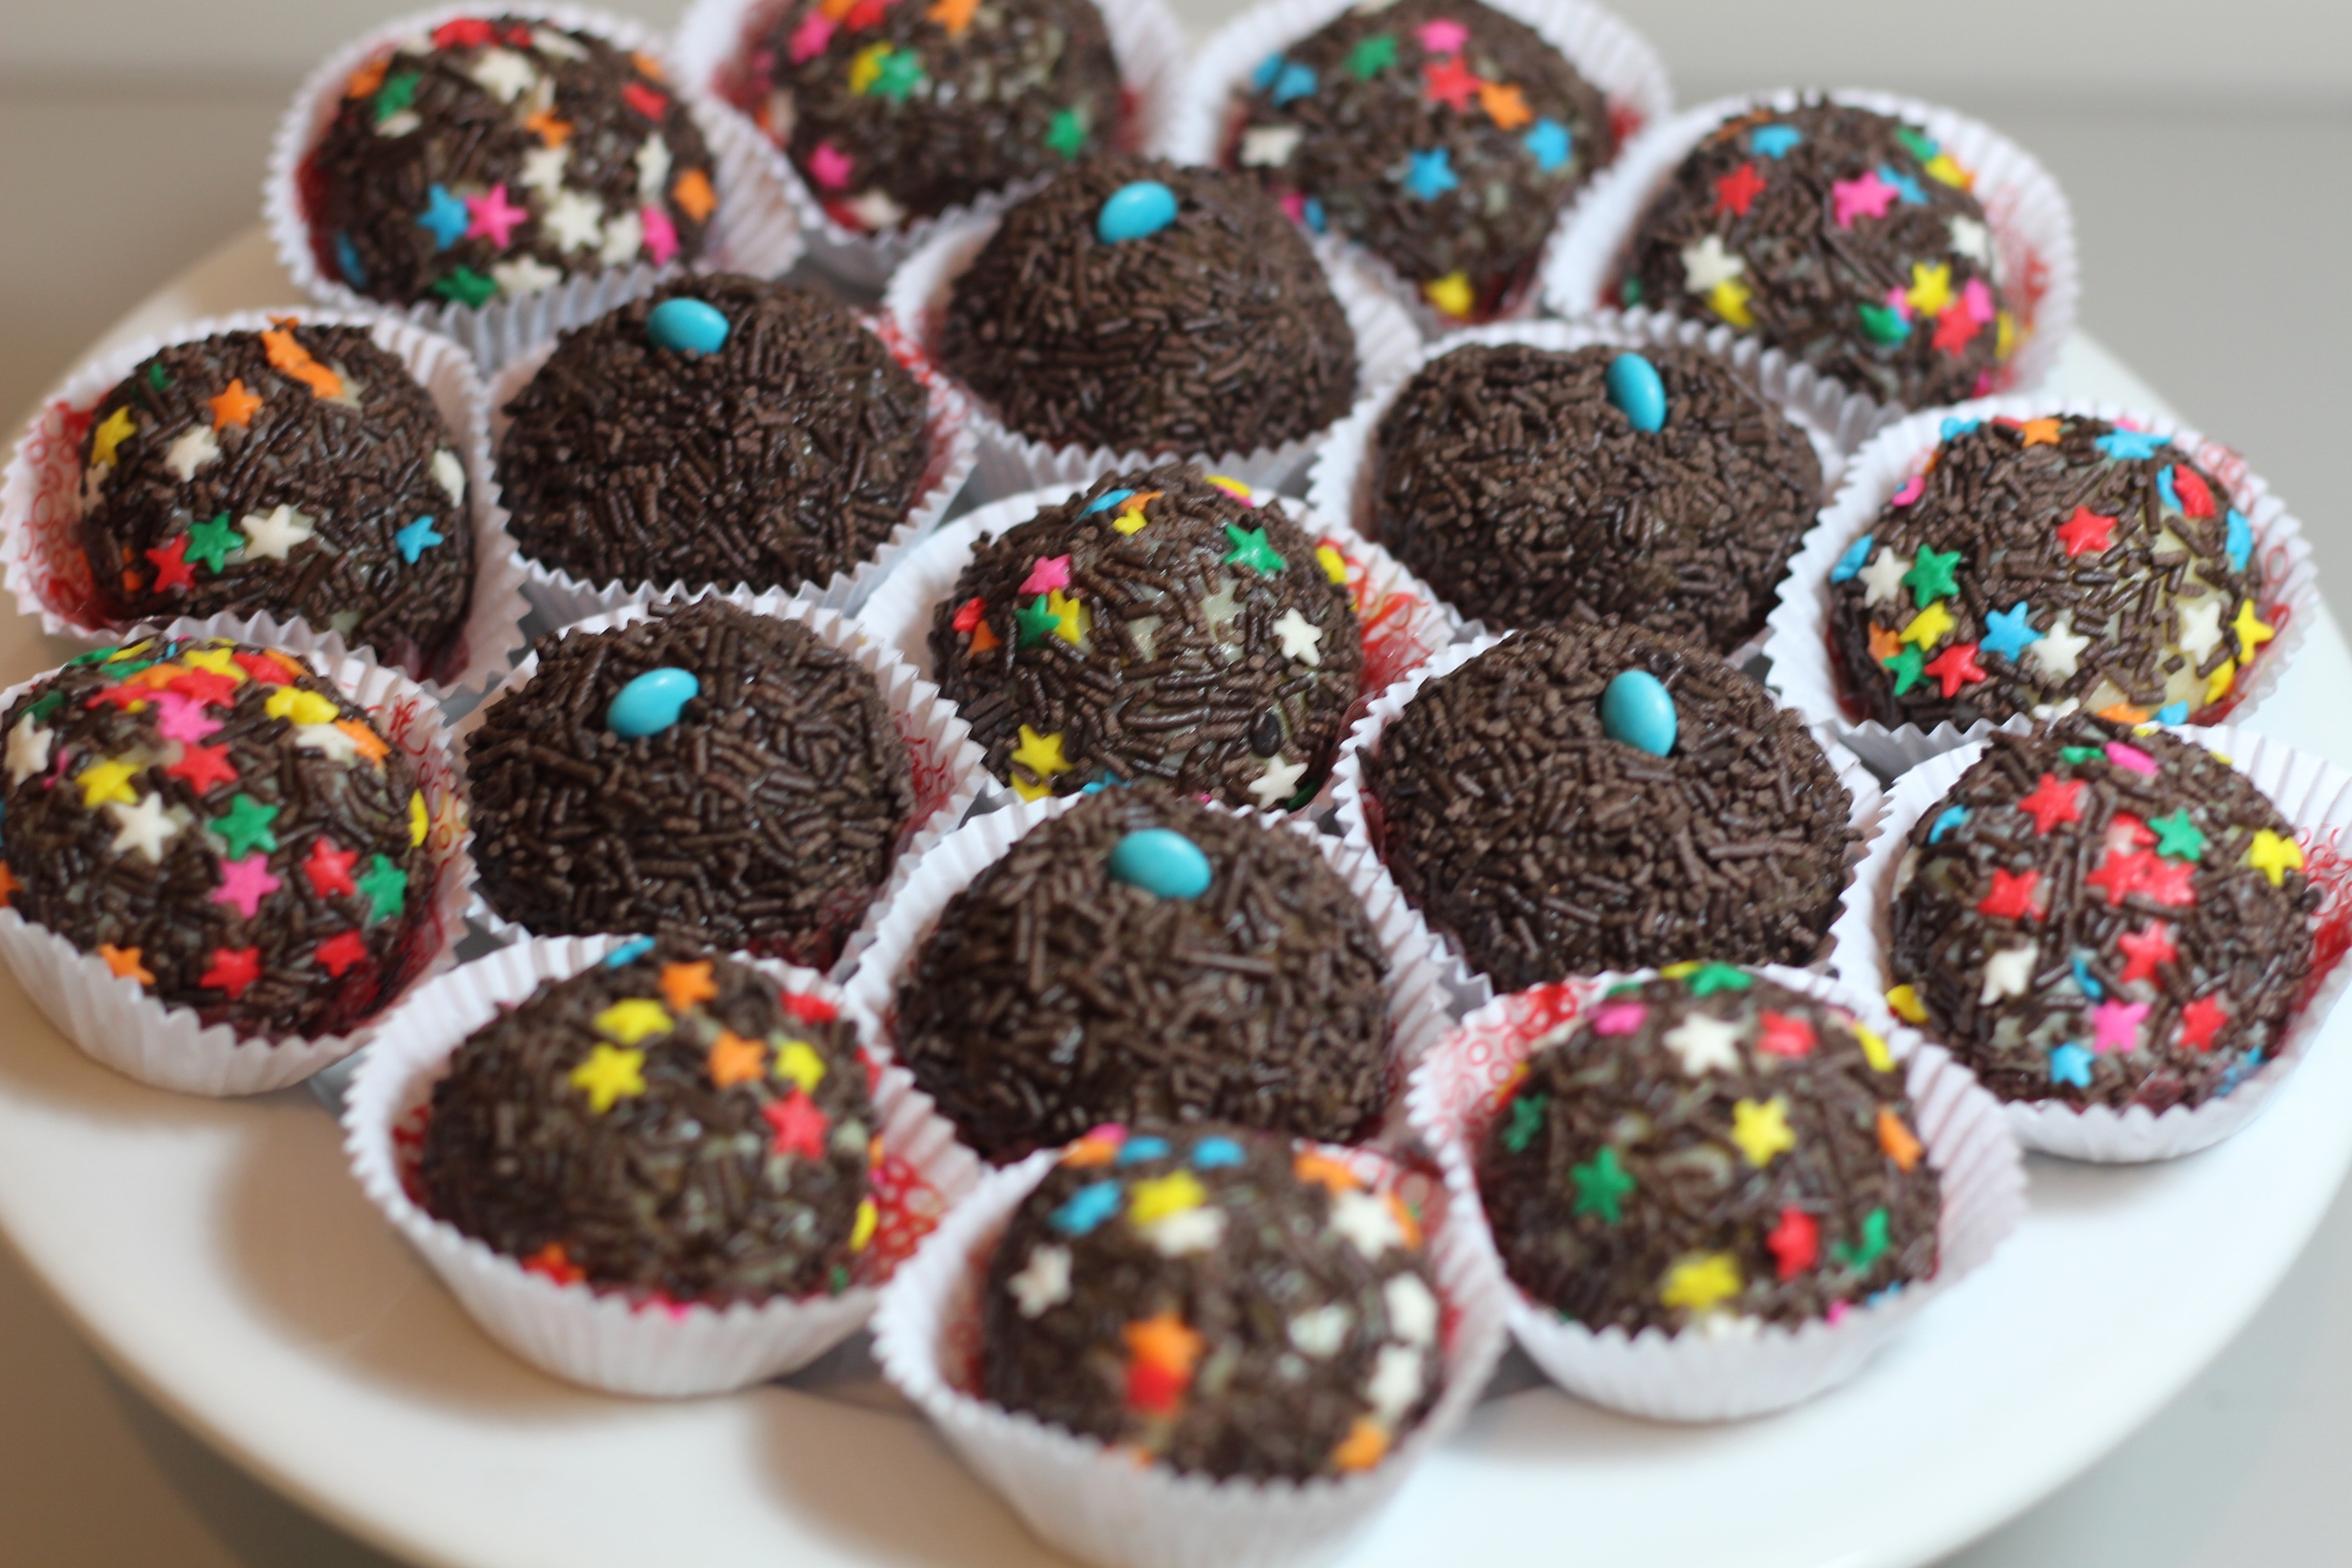 2560x1440 wallpaper | muffins with toppings | Peakpx